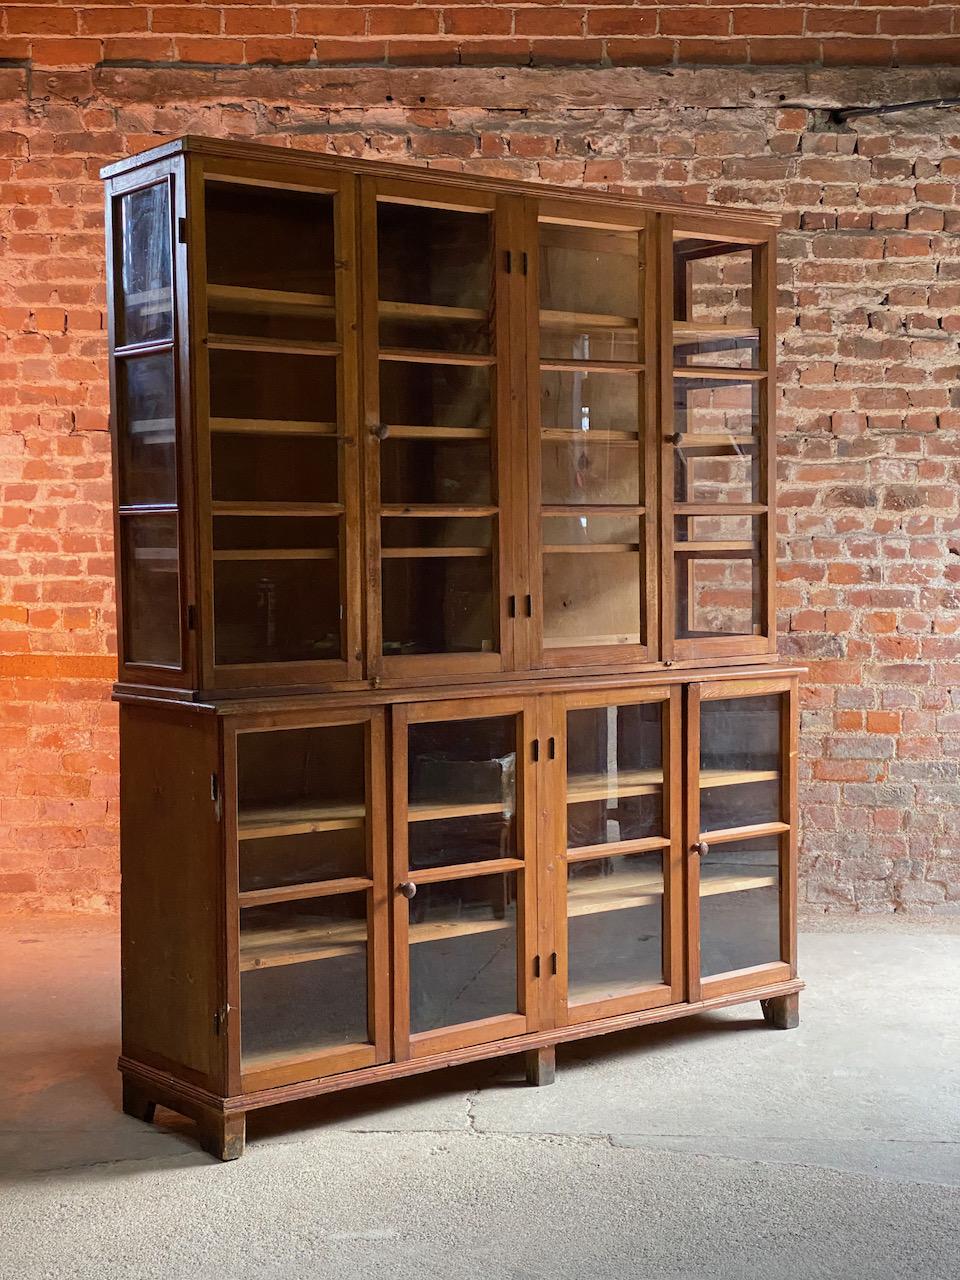 Apothecary no. 8

Large apothecary haberdashery display cabinet circa 1930s number 8

Apothecary / pharmacy / chemist / shop display / restaurant cabinet, circa 1930s

Magnificent early 20th century large apothecary pharmacy beech display